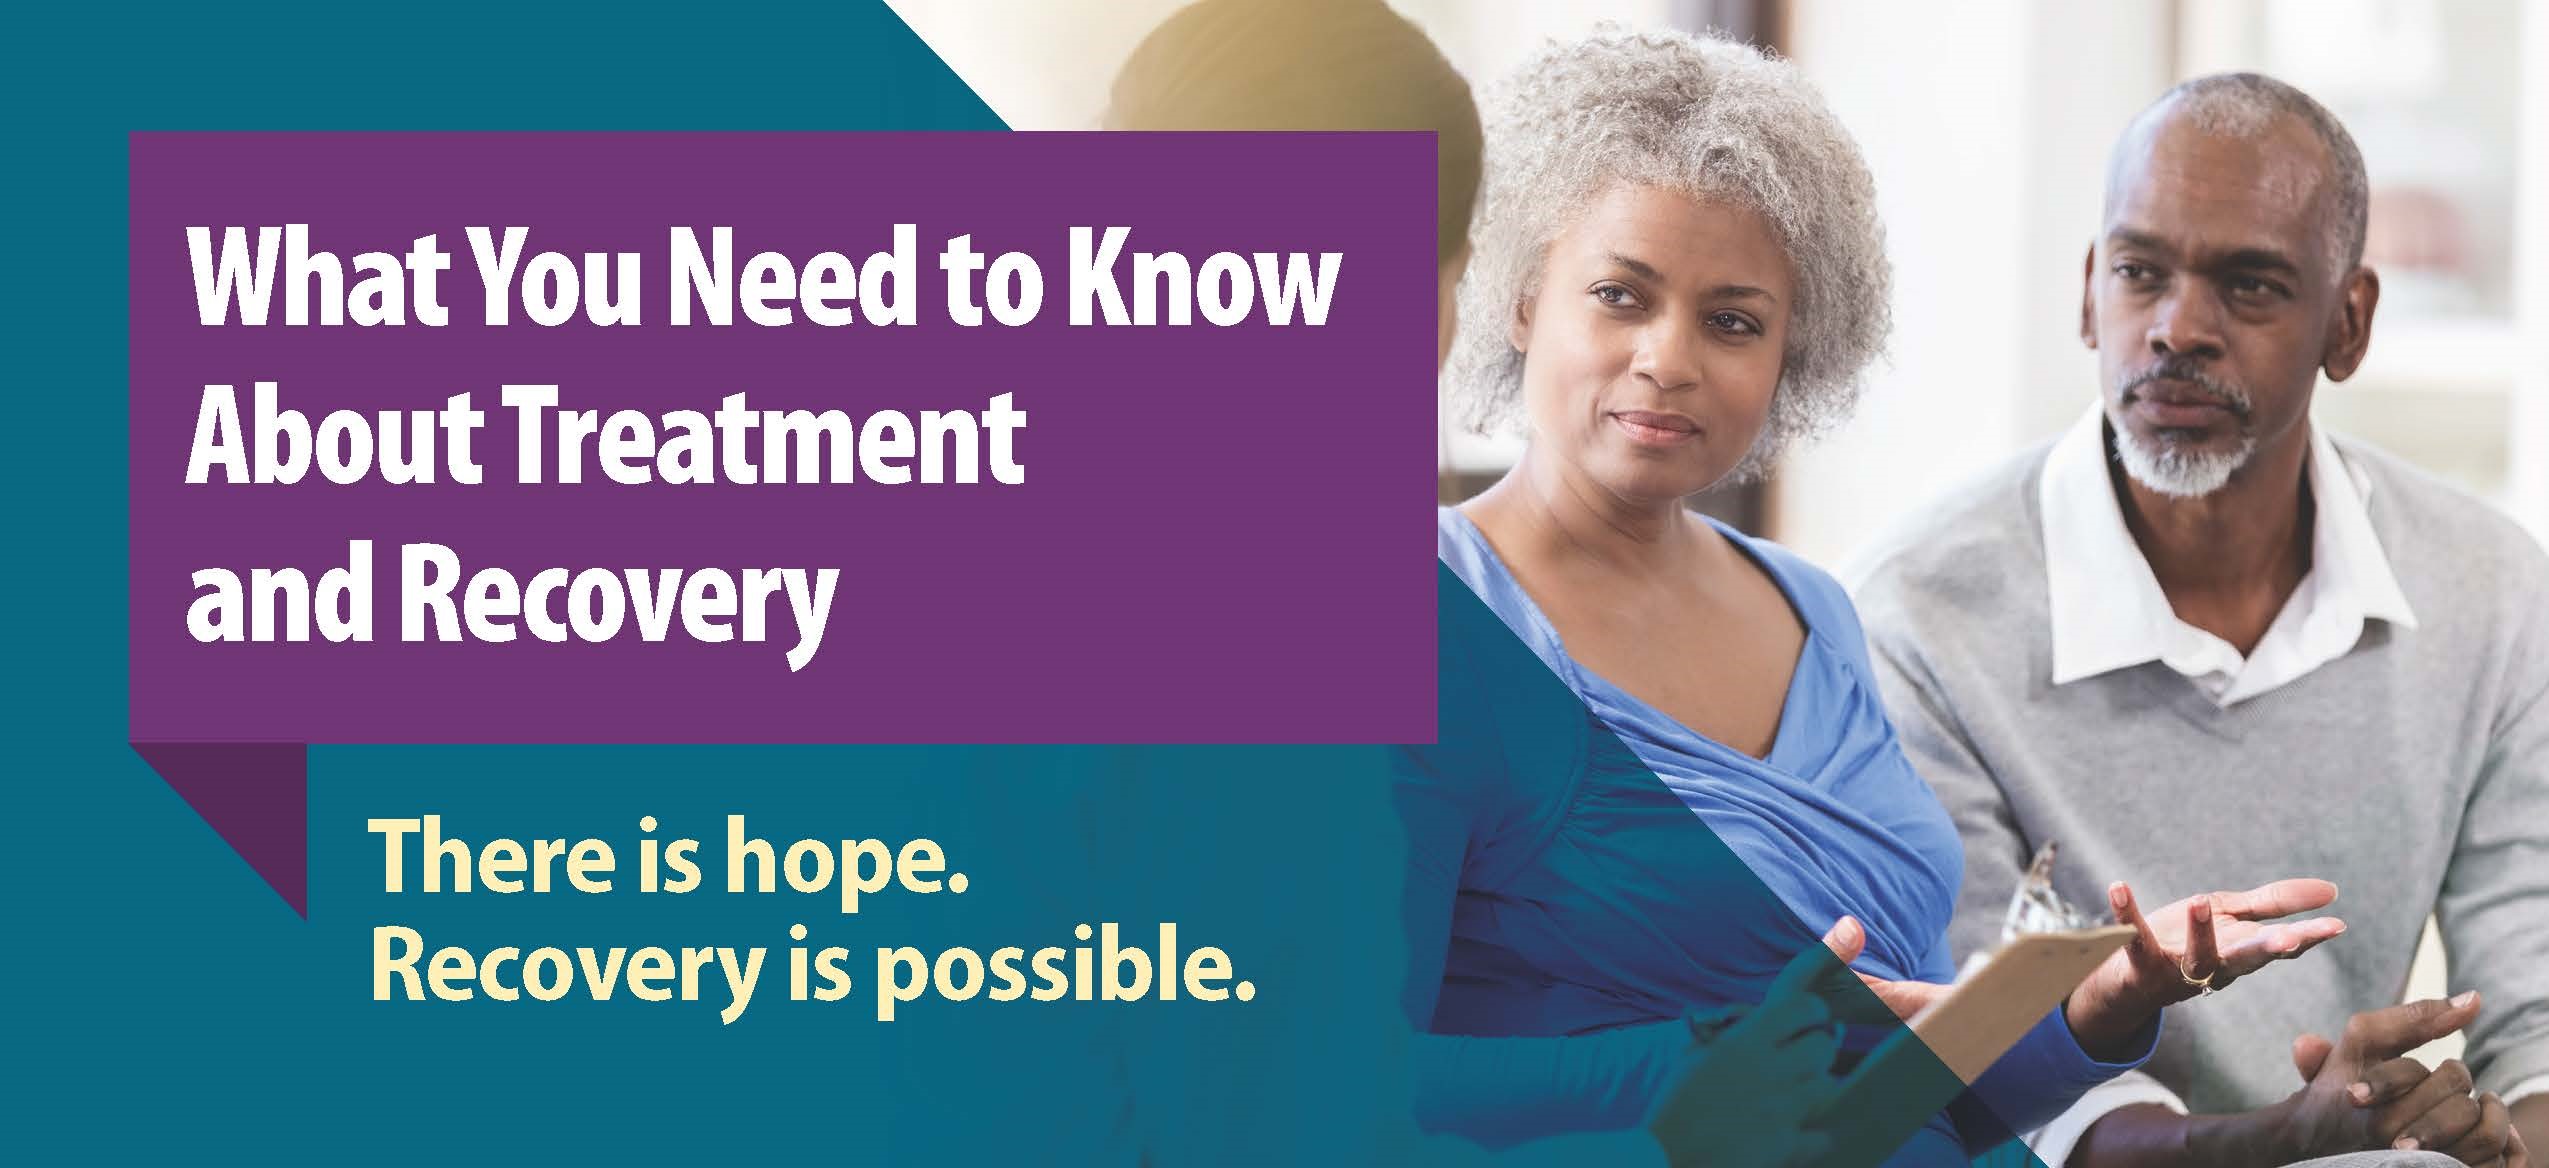 What you need to know about treatment and recovery: There is hope. Recover is possible. 